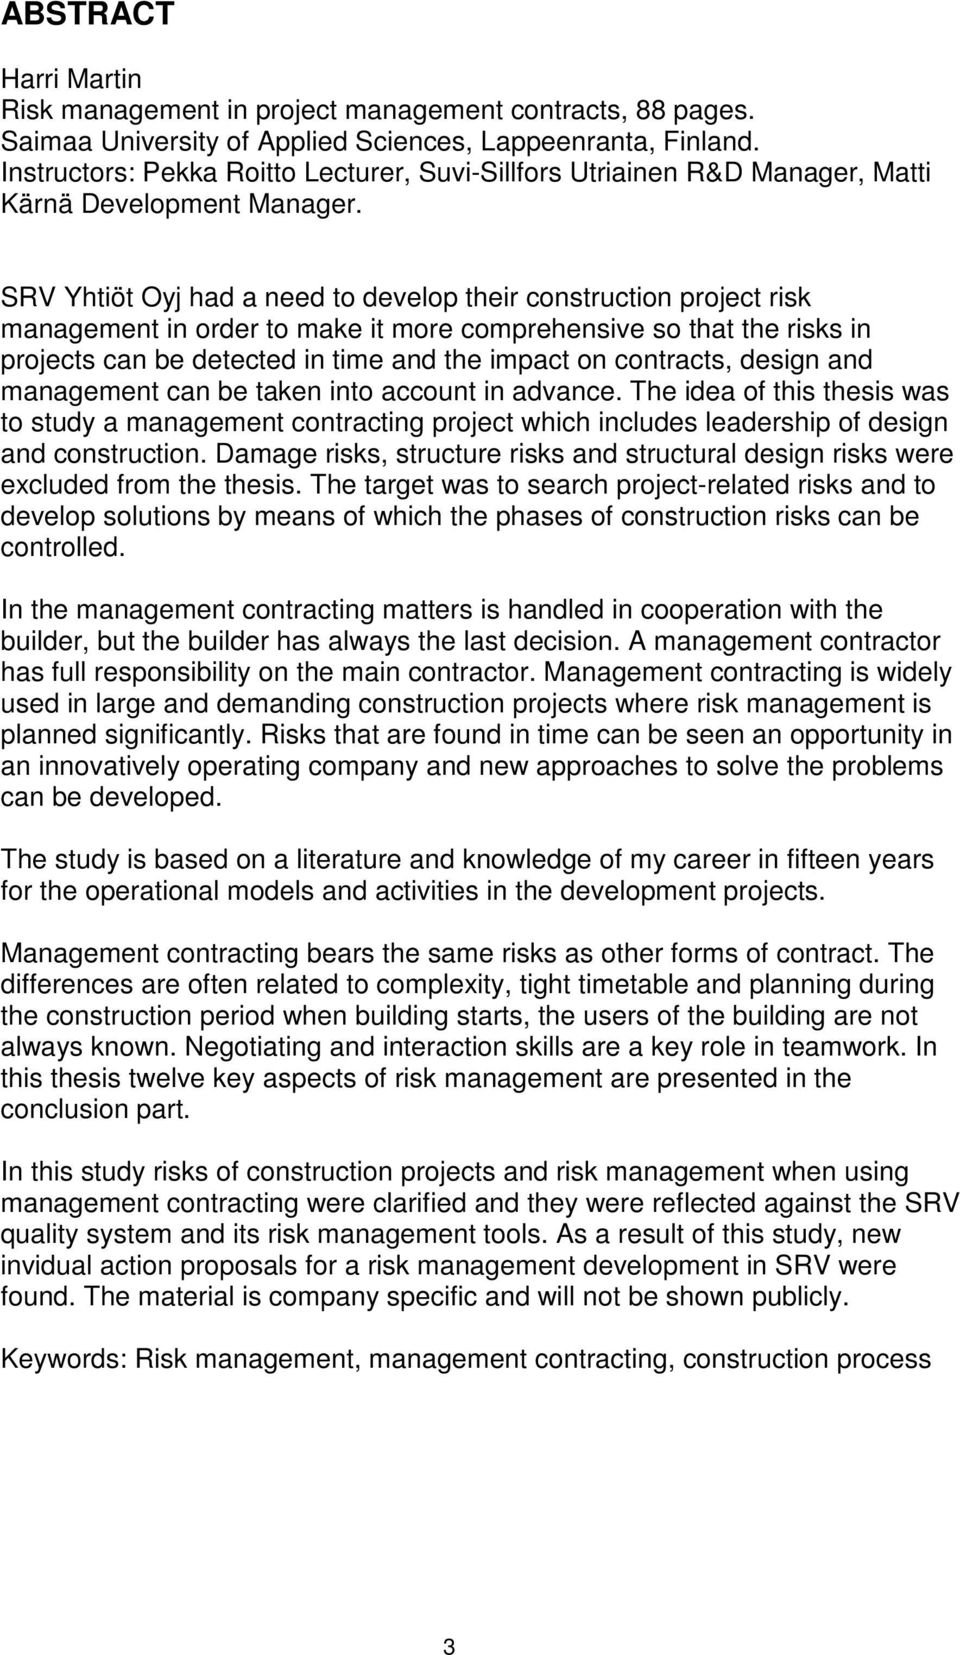 SRV Yhtiöt Oyj had a need to develop their construction project risk management in order to make it more comprehensive so that the risks in projects can be detected in time and the impact on